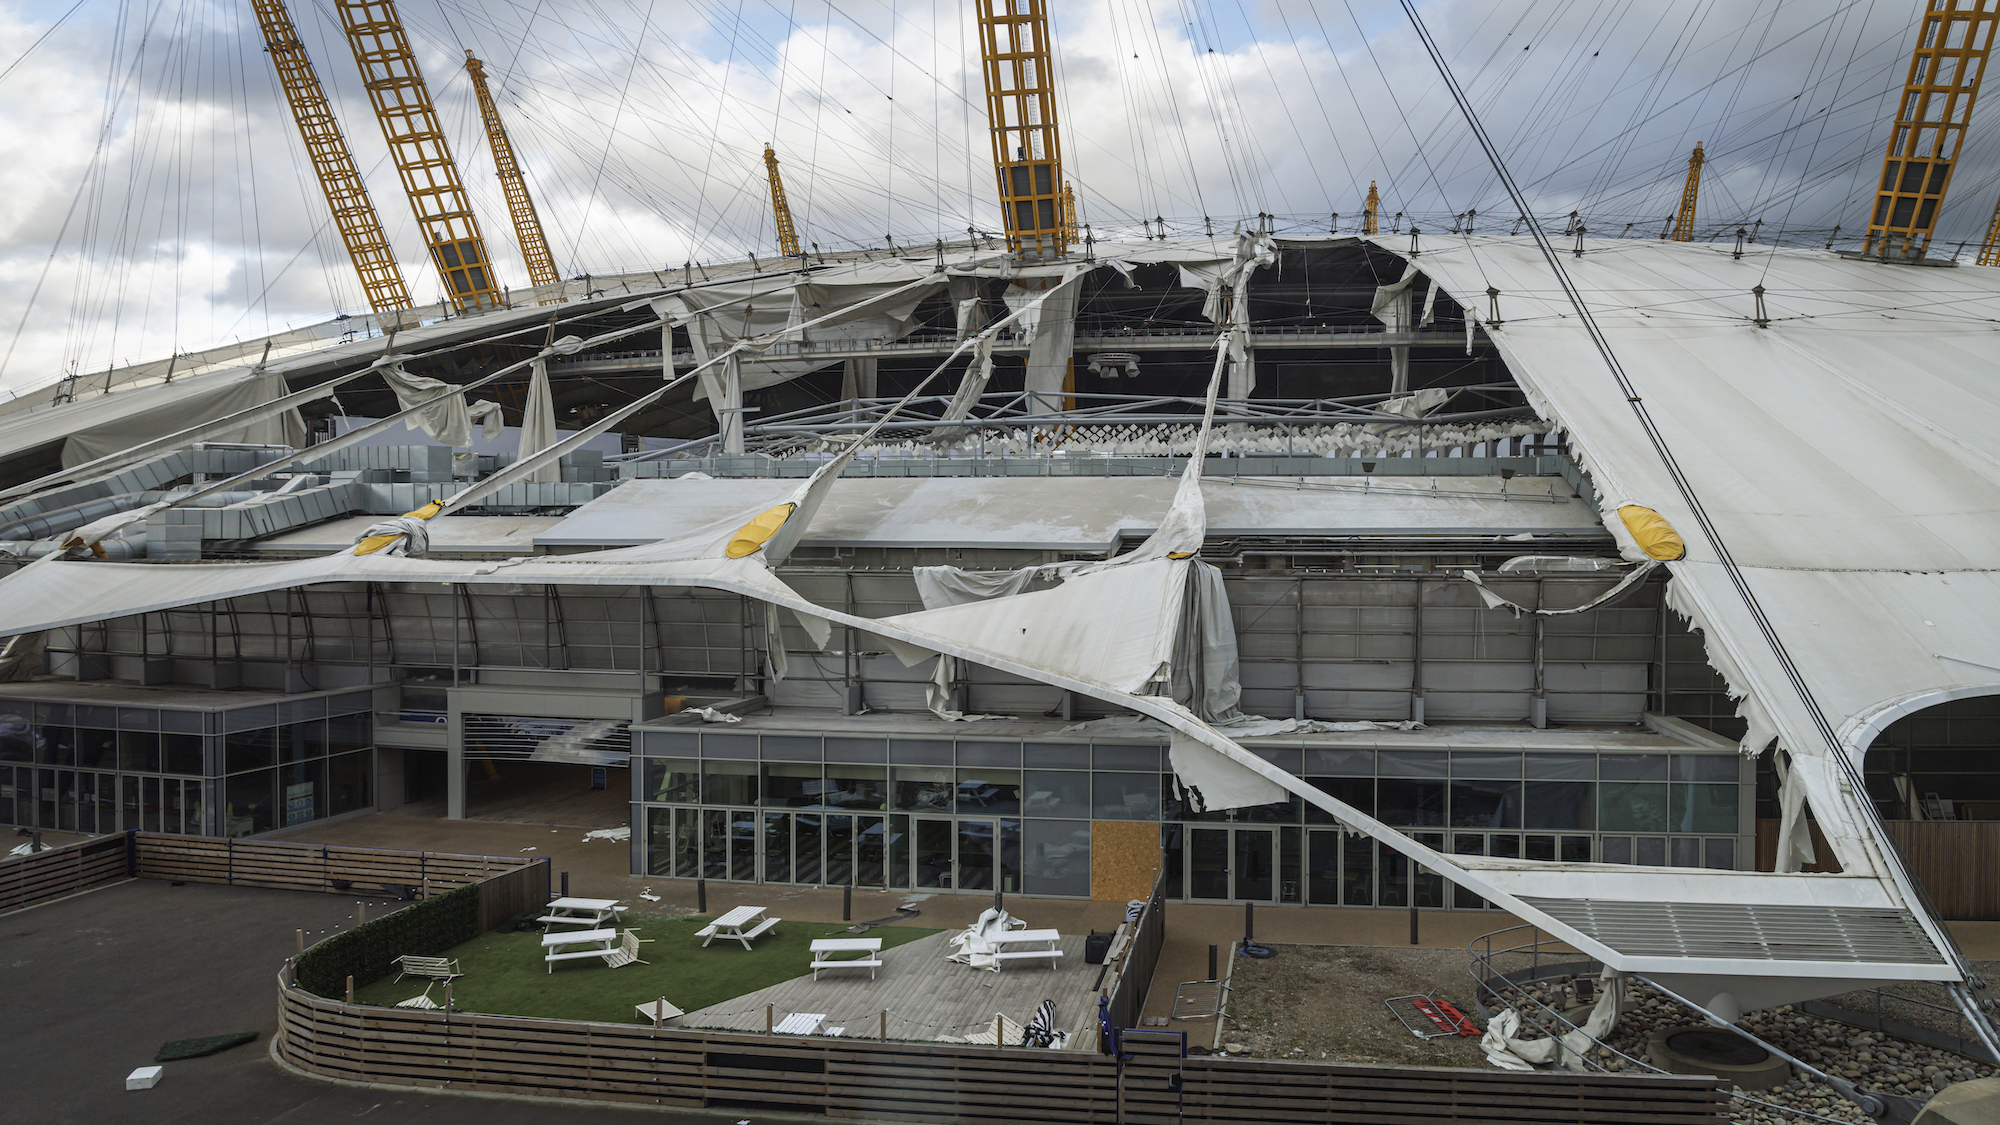 The roof of Arena 02 in London was torn apart by the storm.